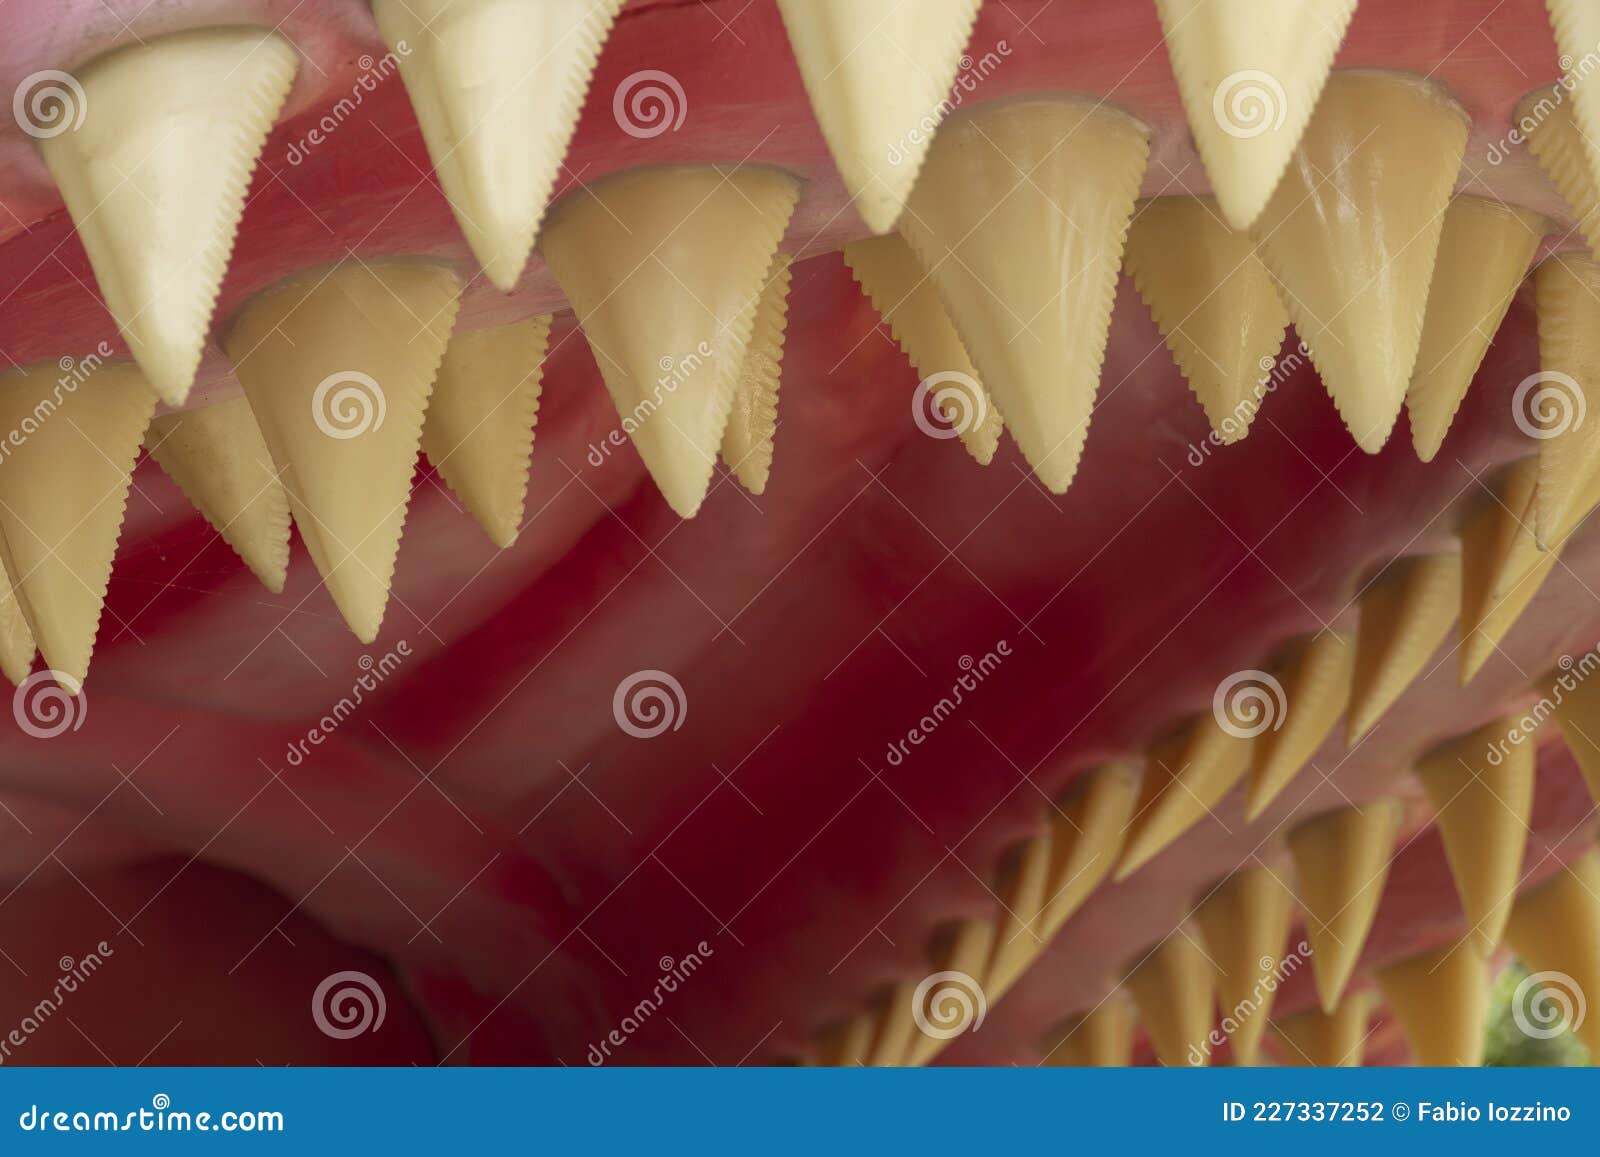 detail of the megalodon`s teeth. the megalodon is an extinct megatoothed shark that existed in prehistoric era